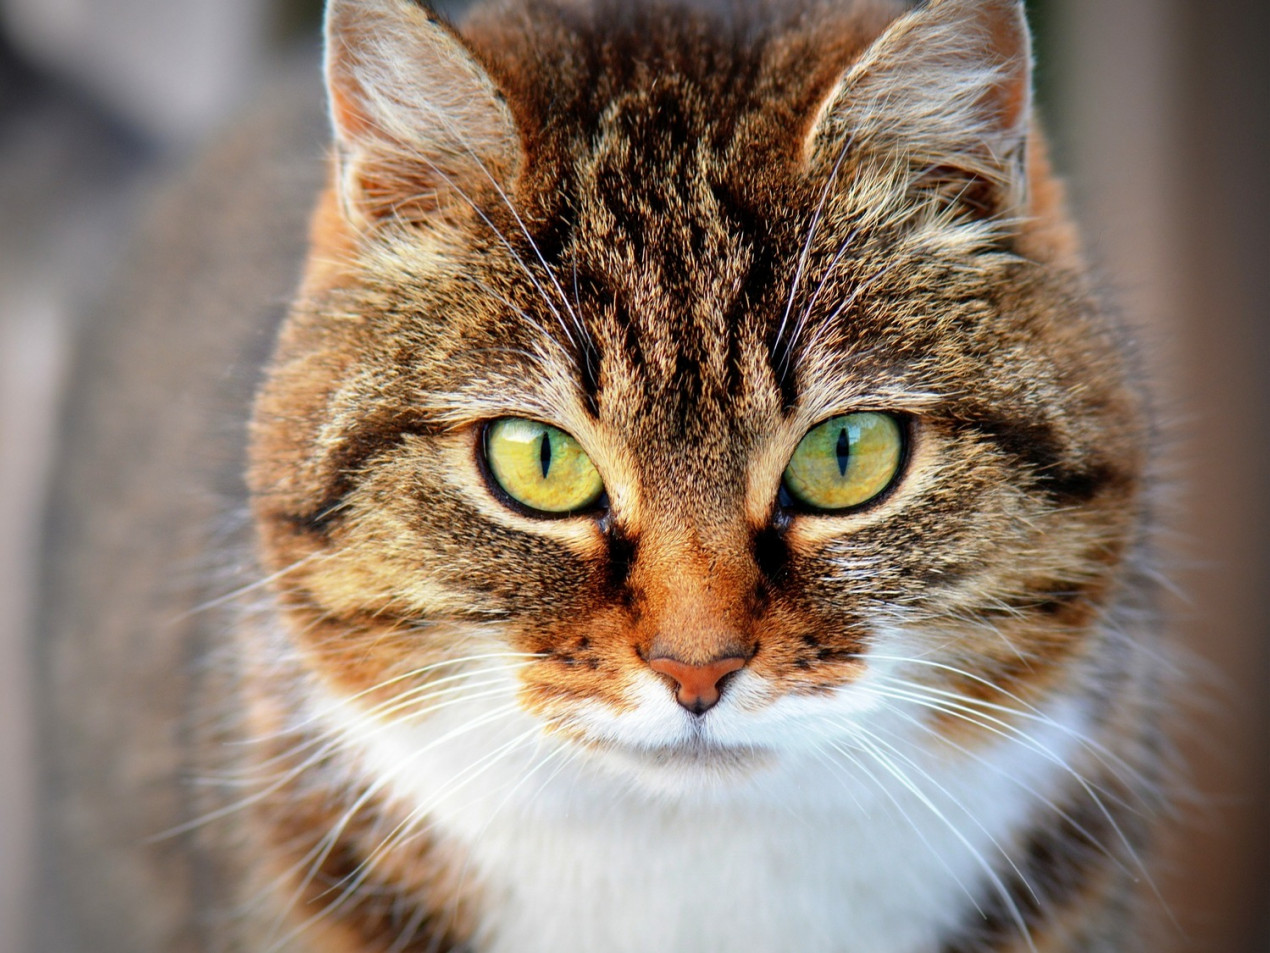 Cat Eye Infection: Symptoms, Causes, & Treatment